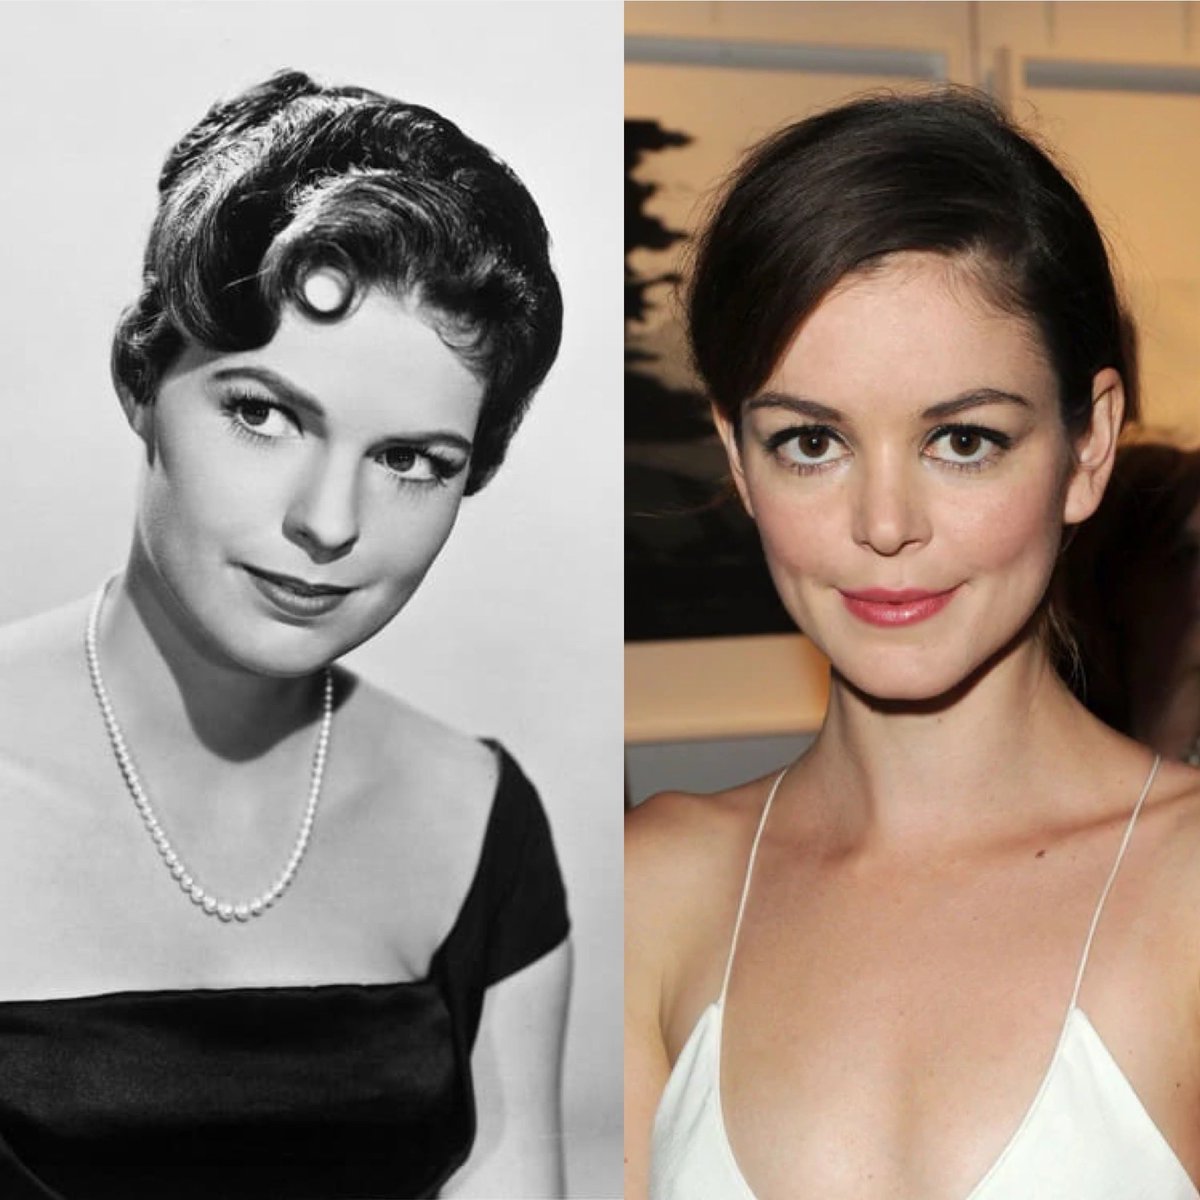 #PamelaLincoln who dabbled in tv like #ZaneGreyTheatre and #OneStepBeyond before her part in #TheTingler resembles #NoraZehetner from #Everwood, #Heroes and #TheRightStuff. #CelebrityLookalikes